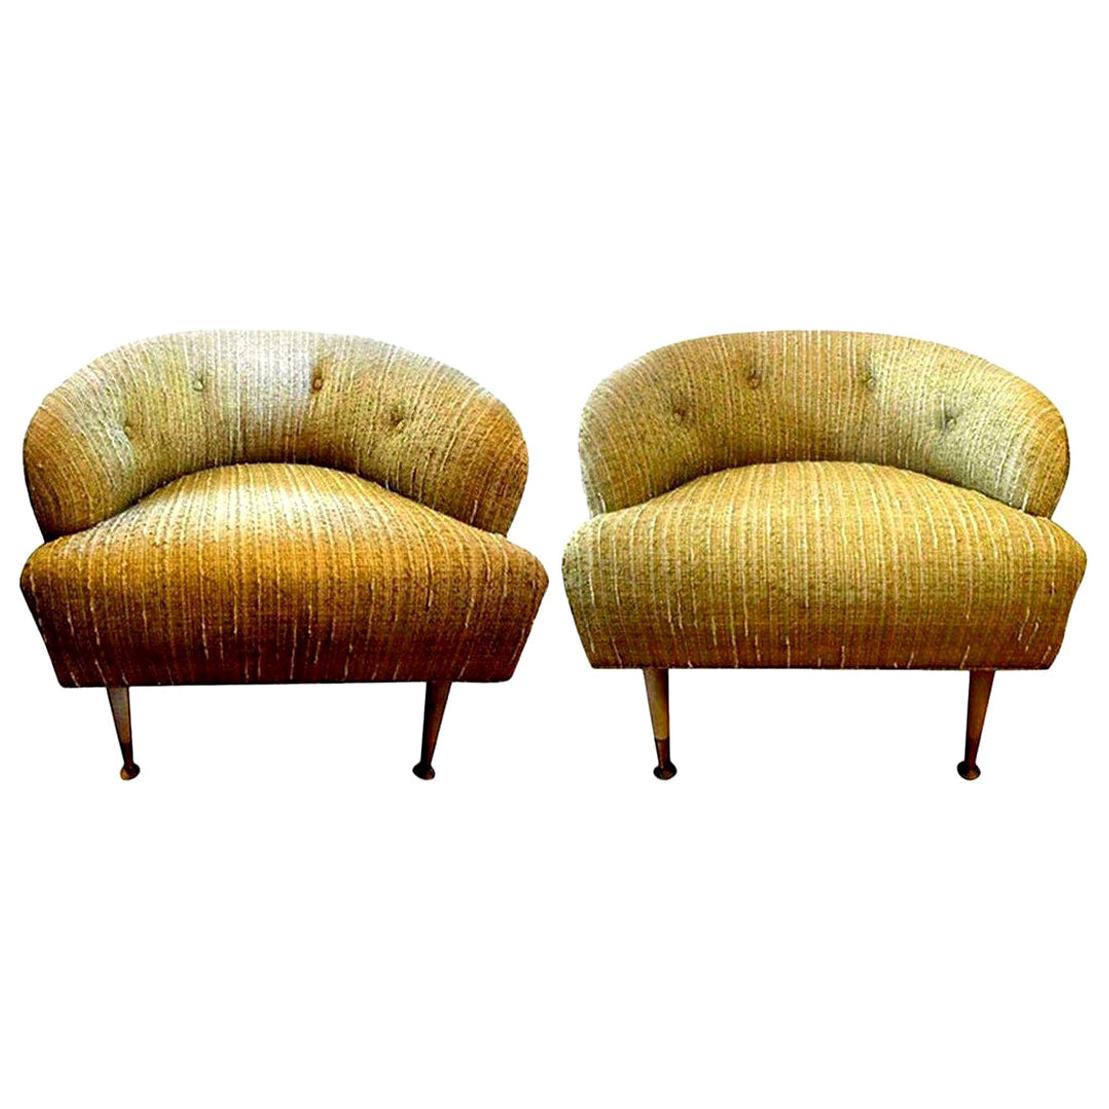 Pair of Italian Lounge Chairs Inspired by Gio Ponti